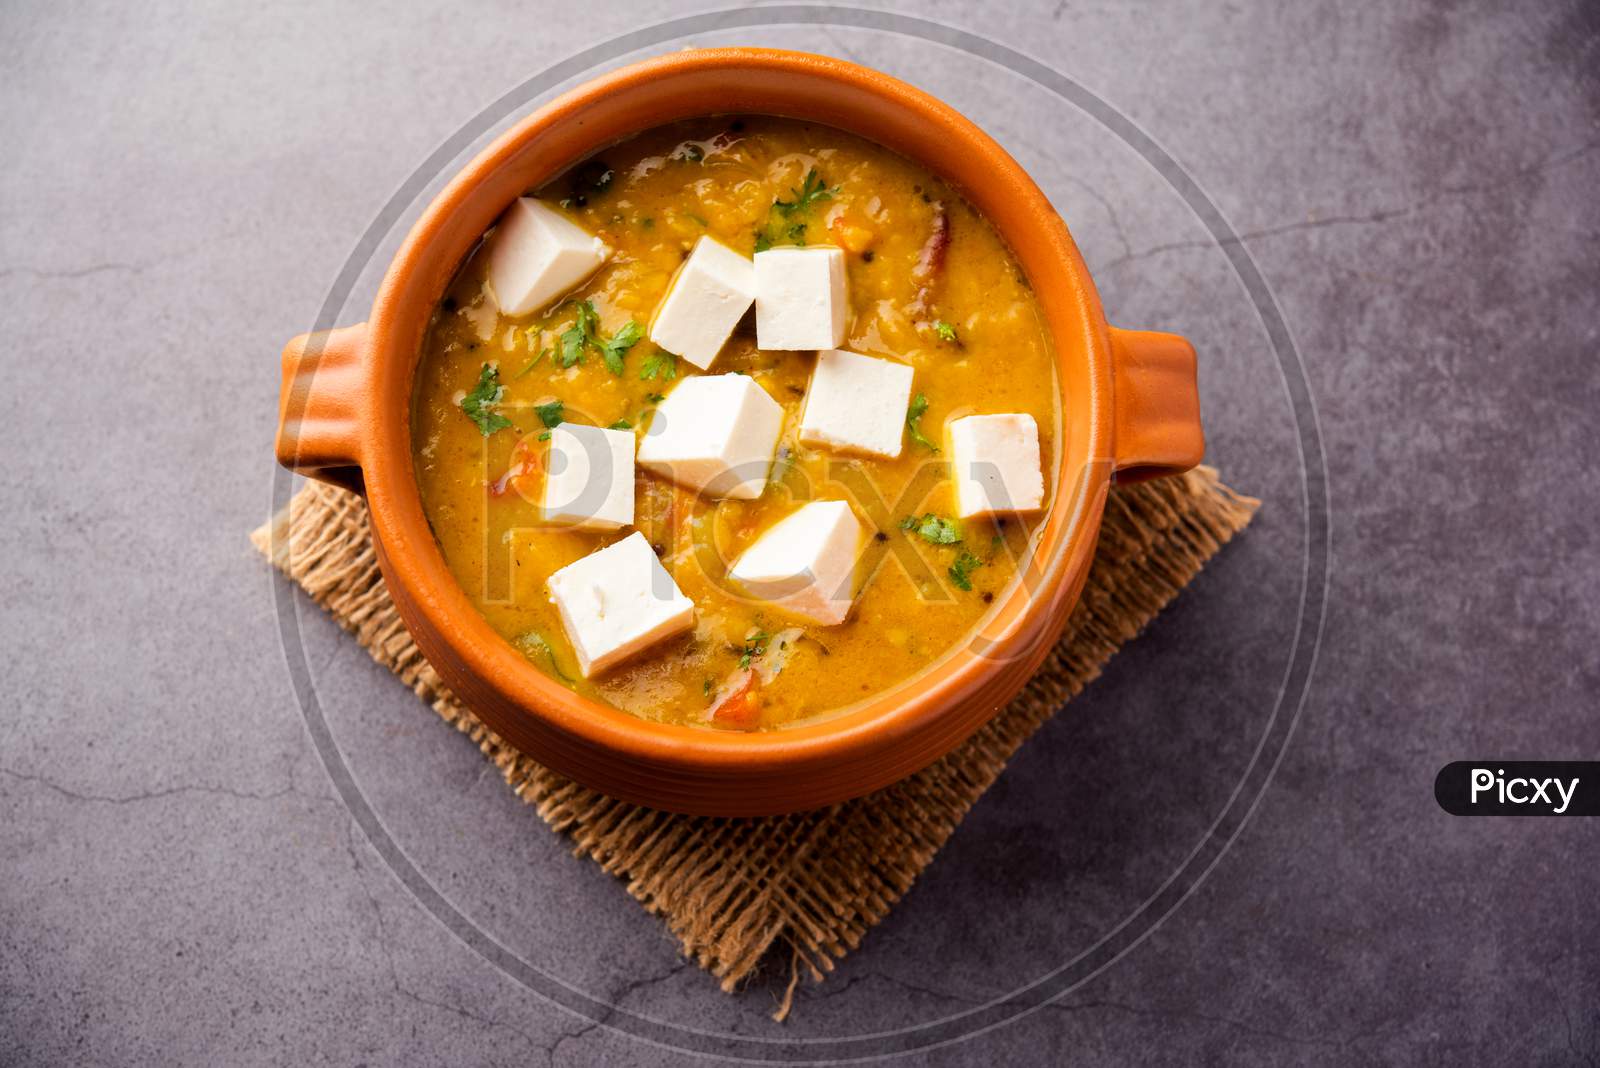 Butter Dal Fry Paneer Masala Is An Indian Food Recipe Served In A Bowl